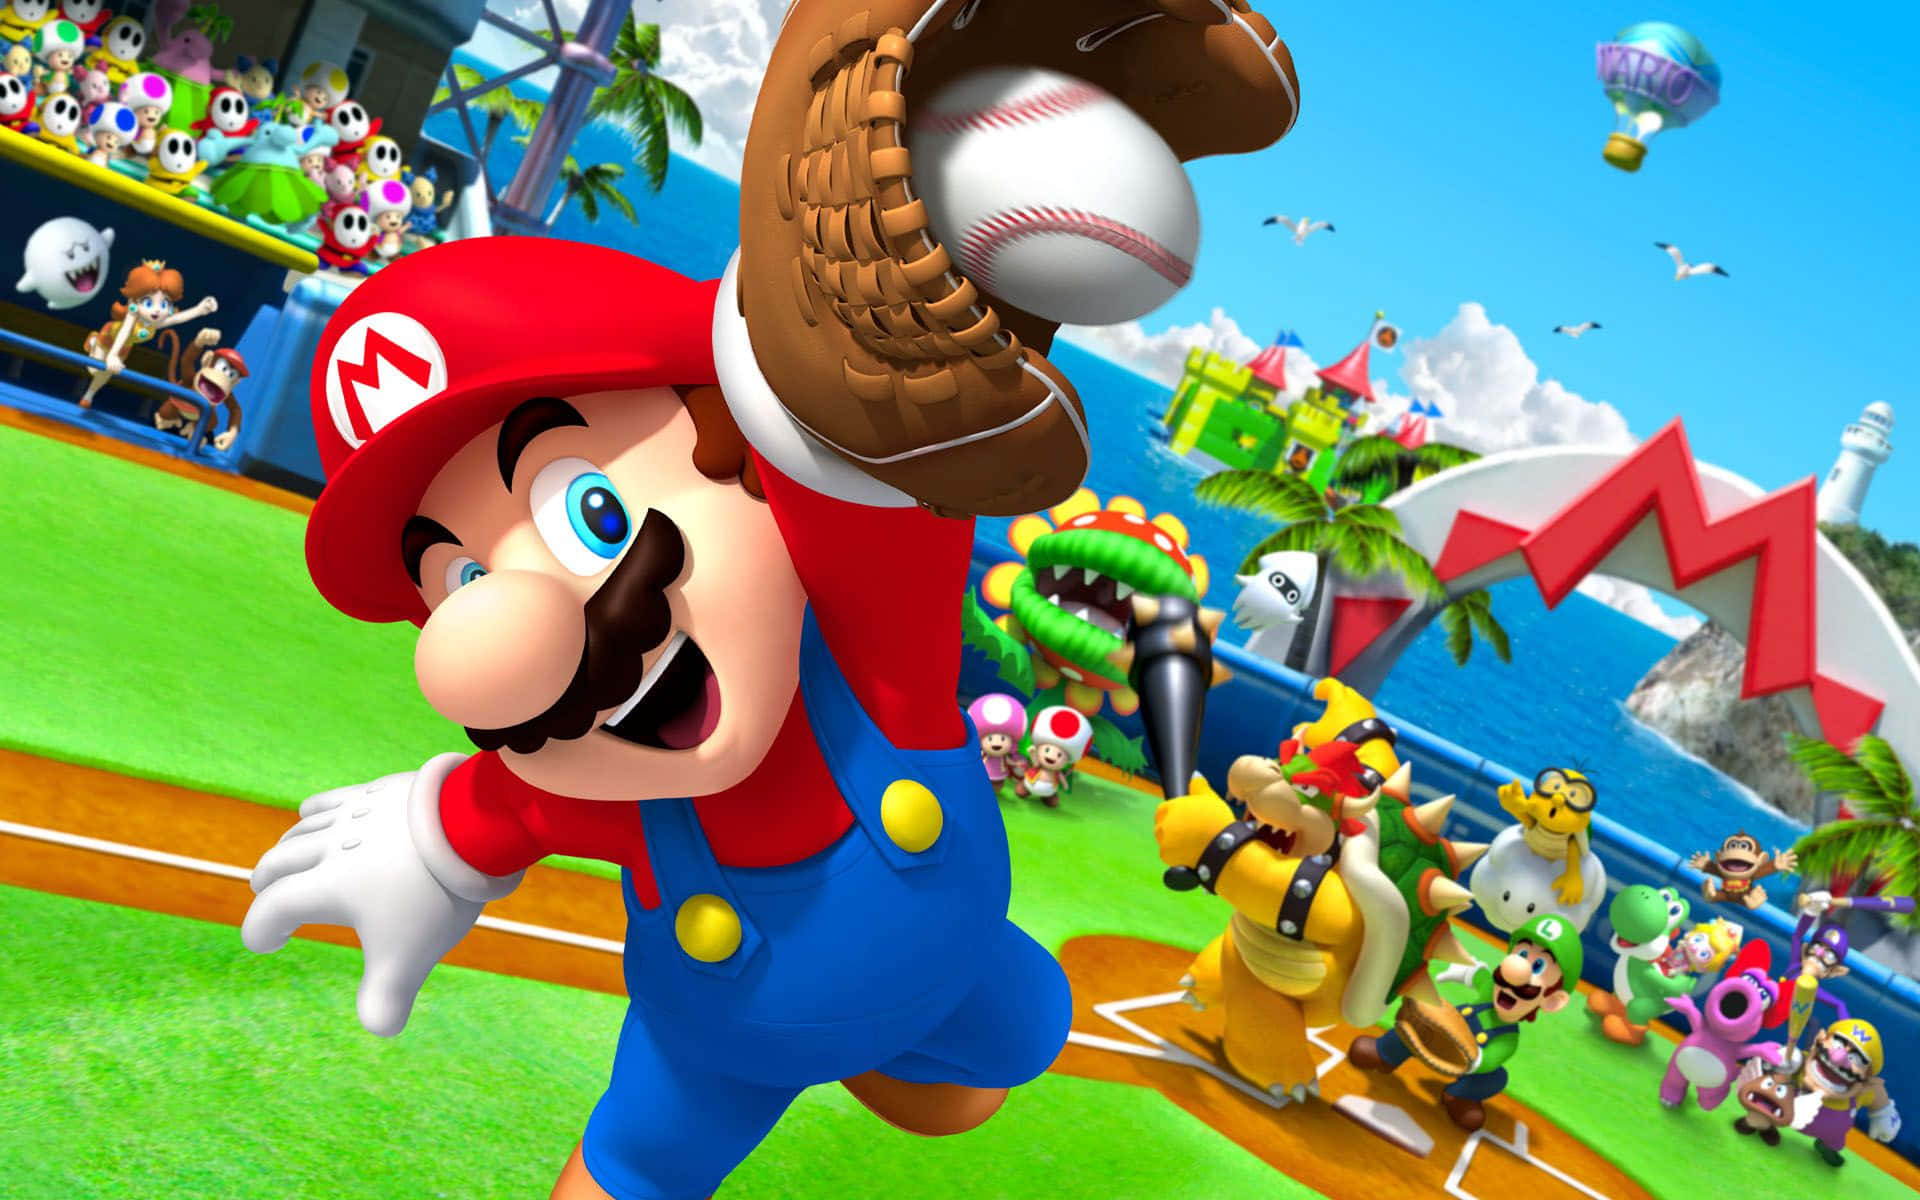 Embark on an intergalactic journey with Super Mario Galaxy Wallpaper